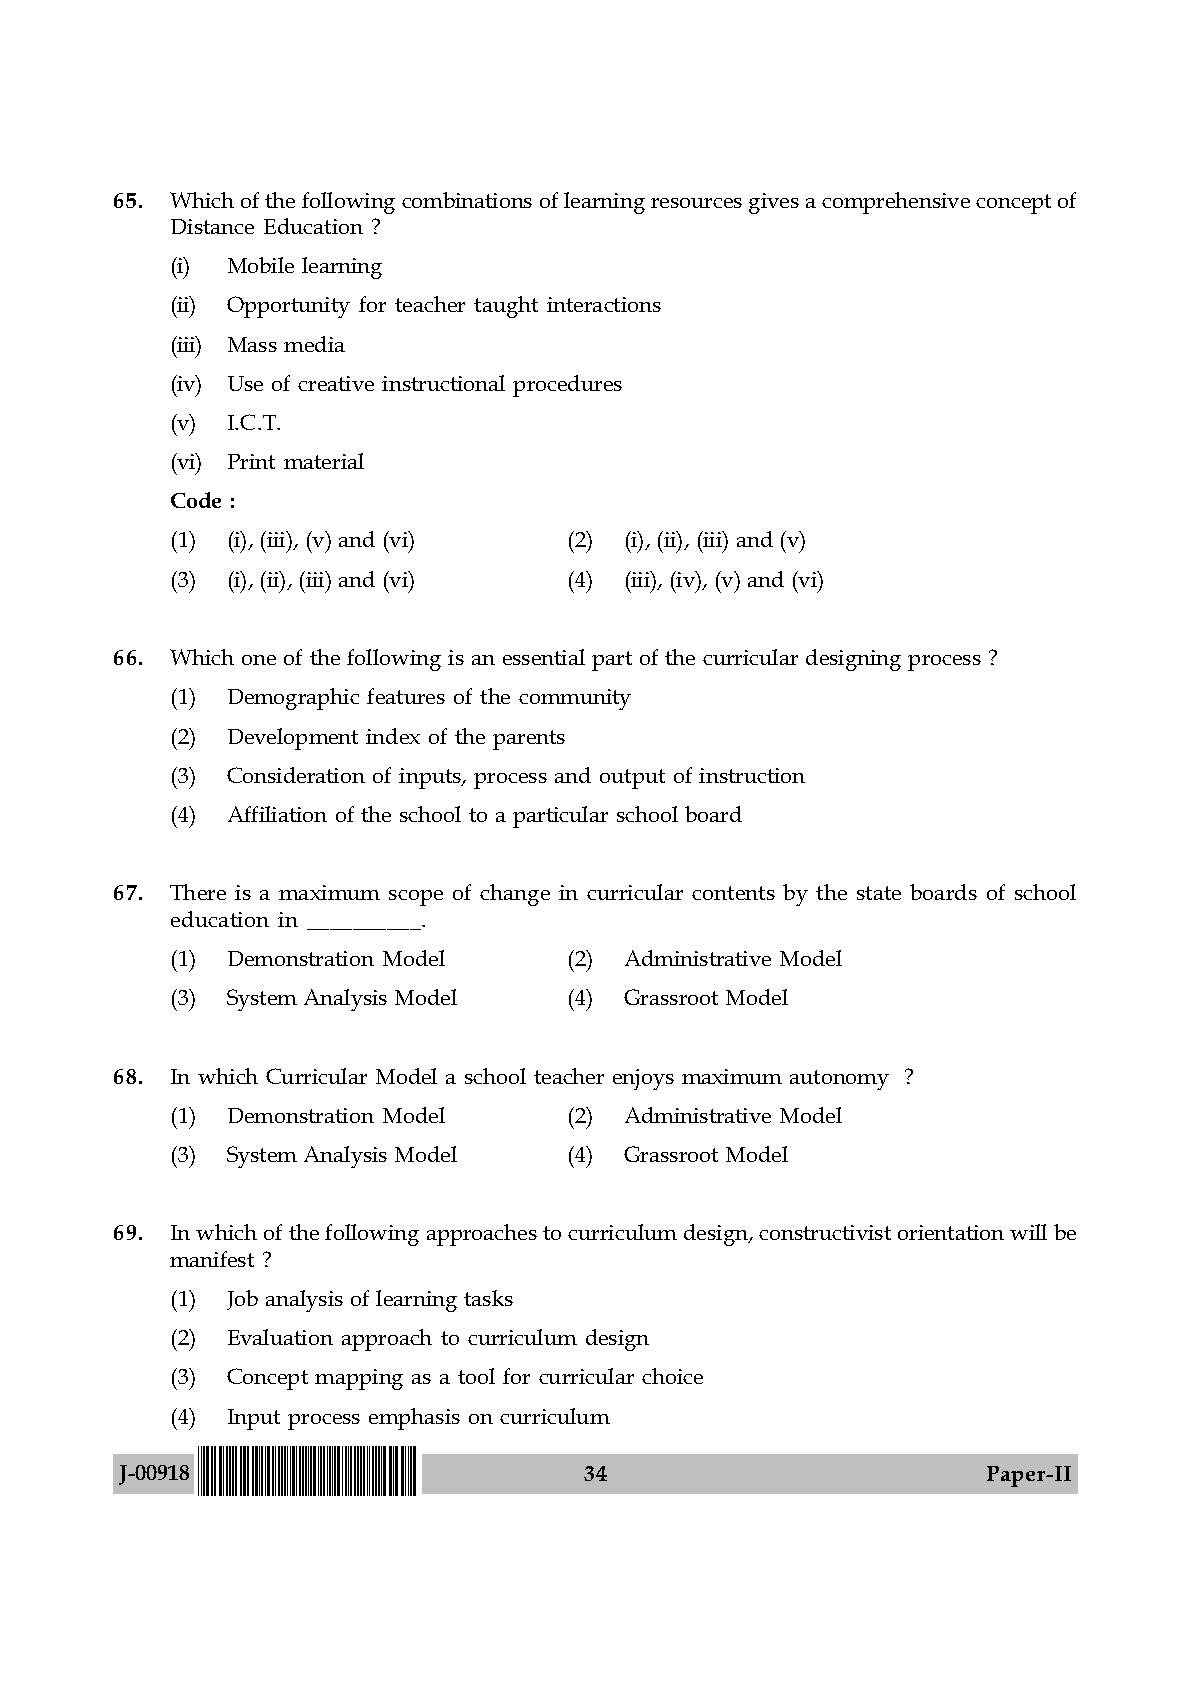 2018 education question paper solved